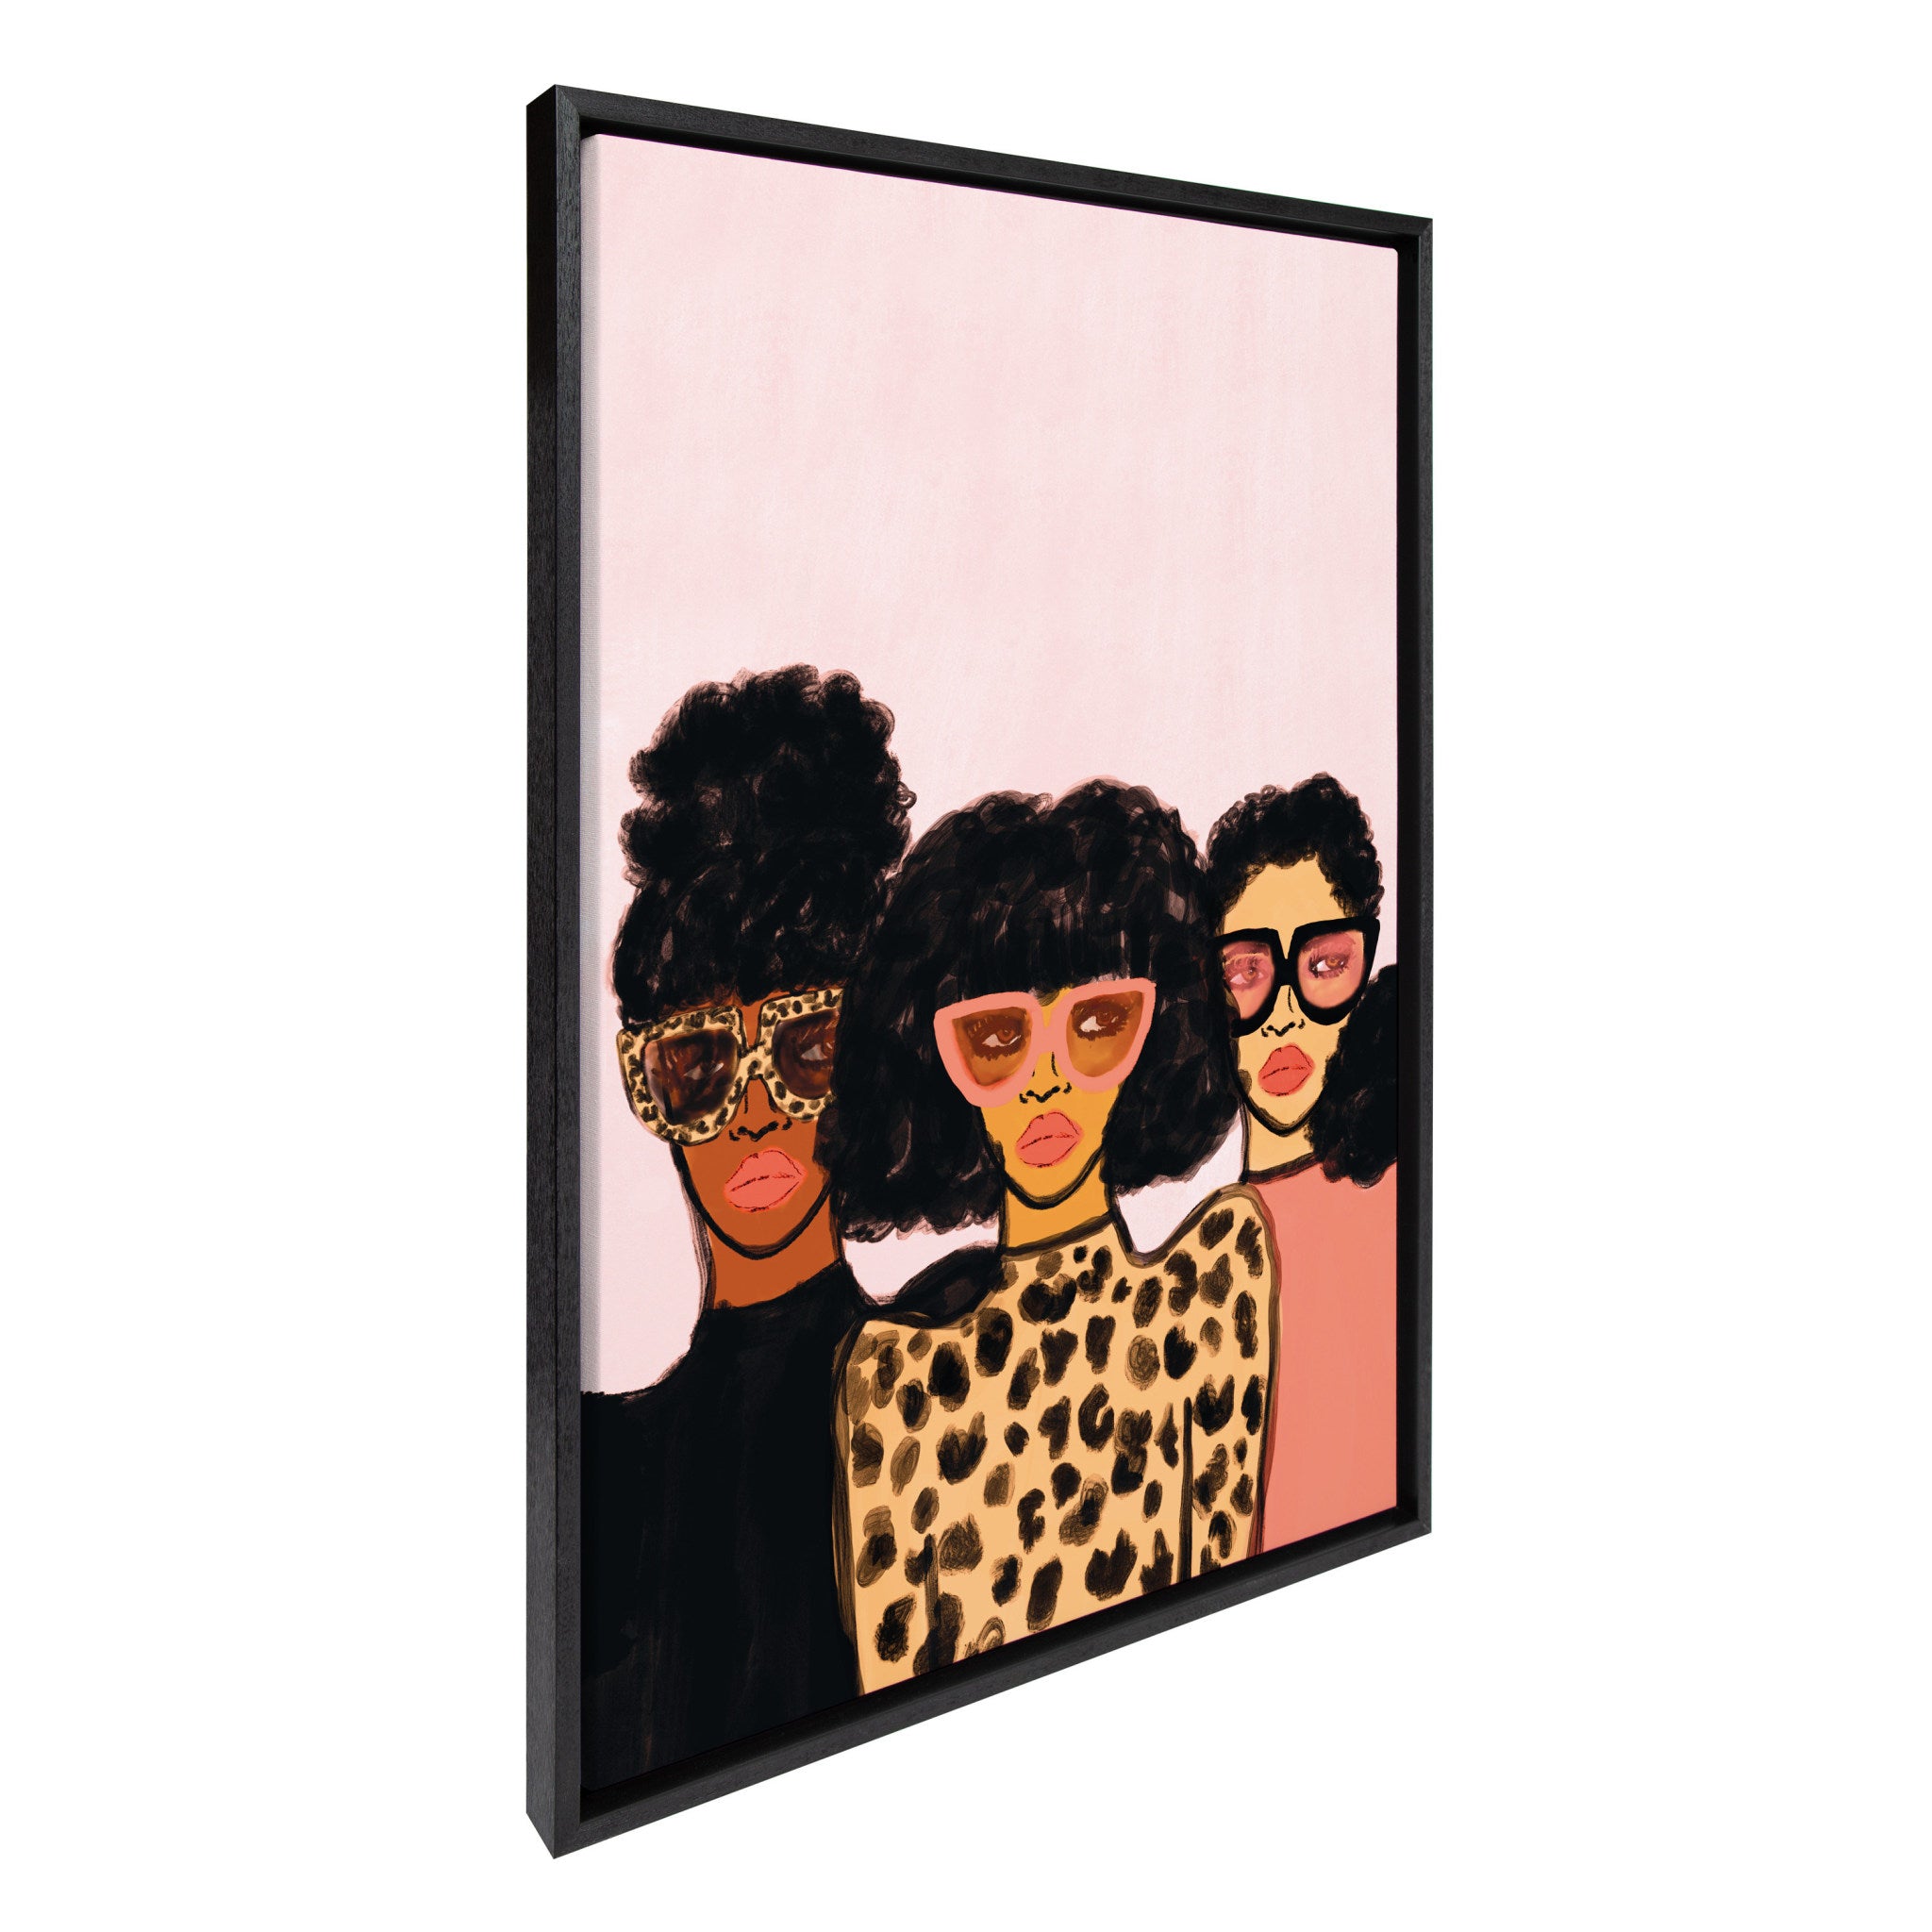 Sylvie Fashion Girl Framed Canvas Set by Kendra Dandy of Bouffants and Broken Hearts